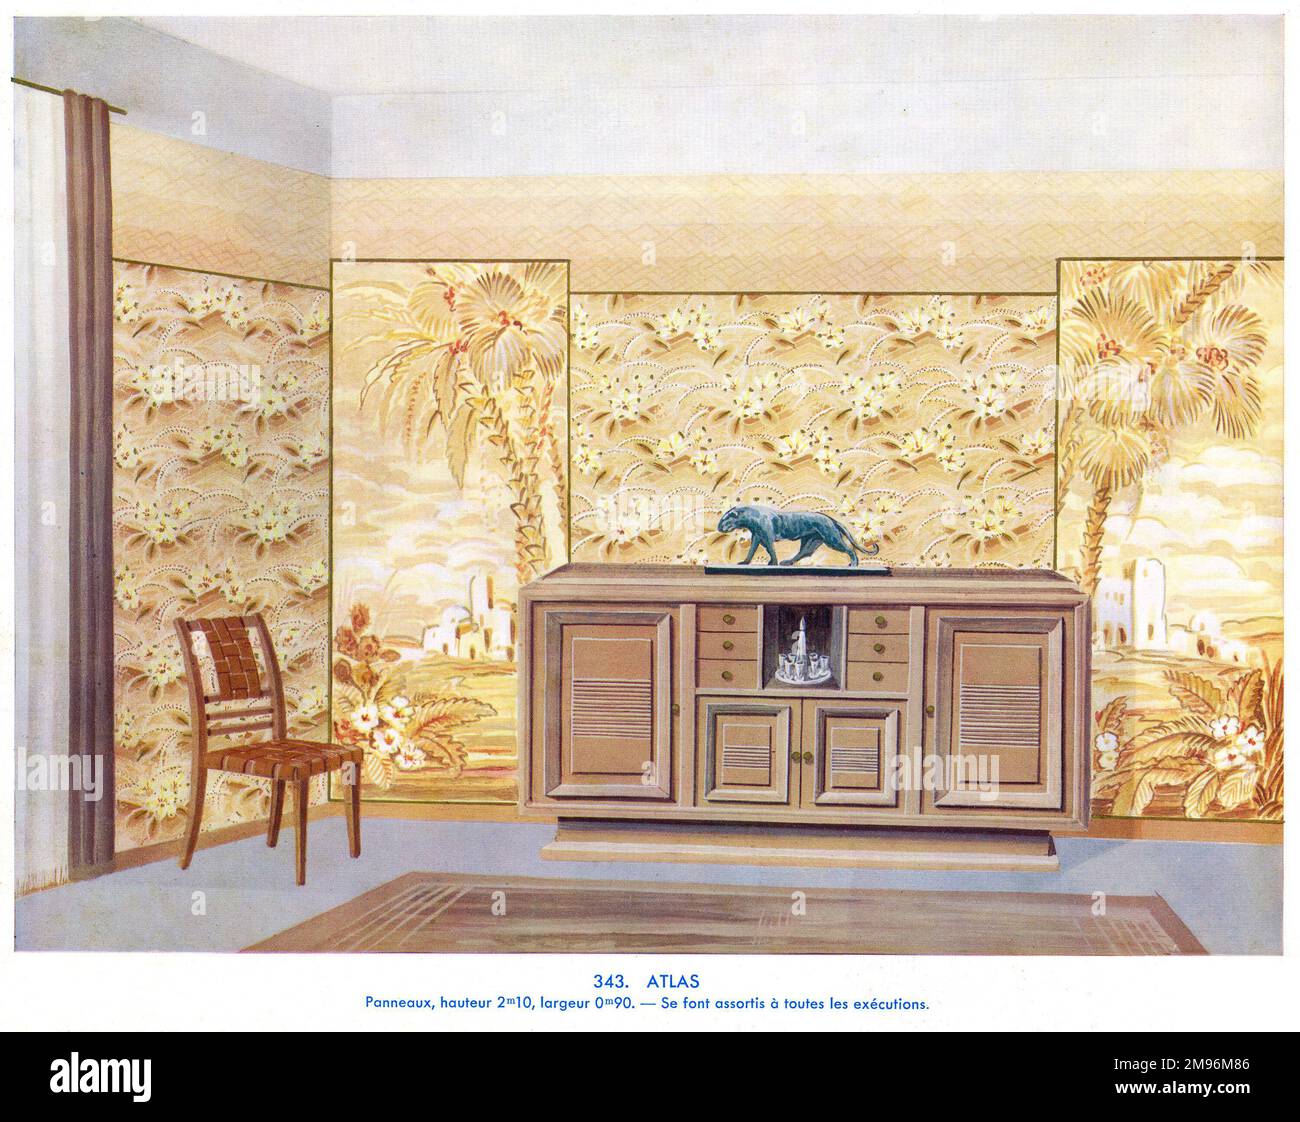 Wallpaper designs shown in a sample interior with a sideboard in front -- Atlas. Stock Photo